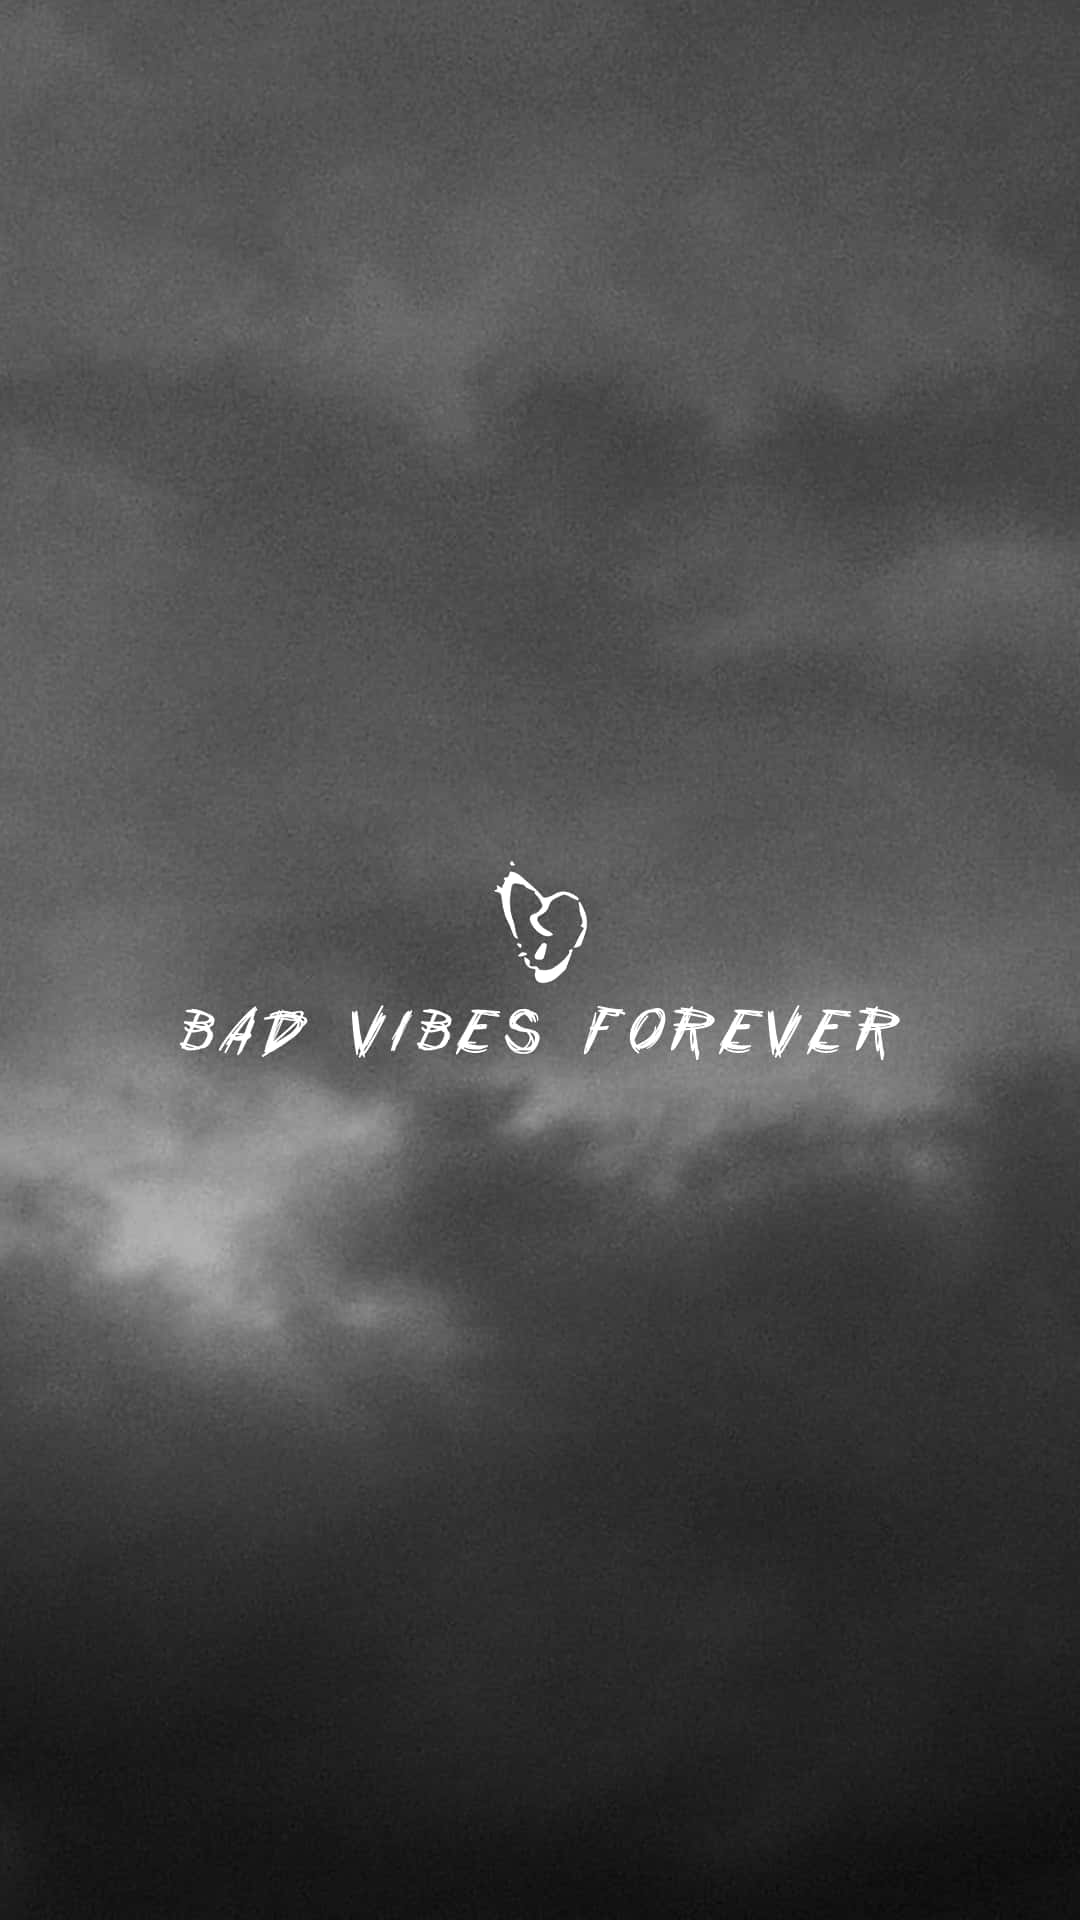 Bad Vibes Forever - A Black And White Image Wallpaper